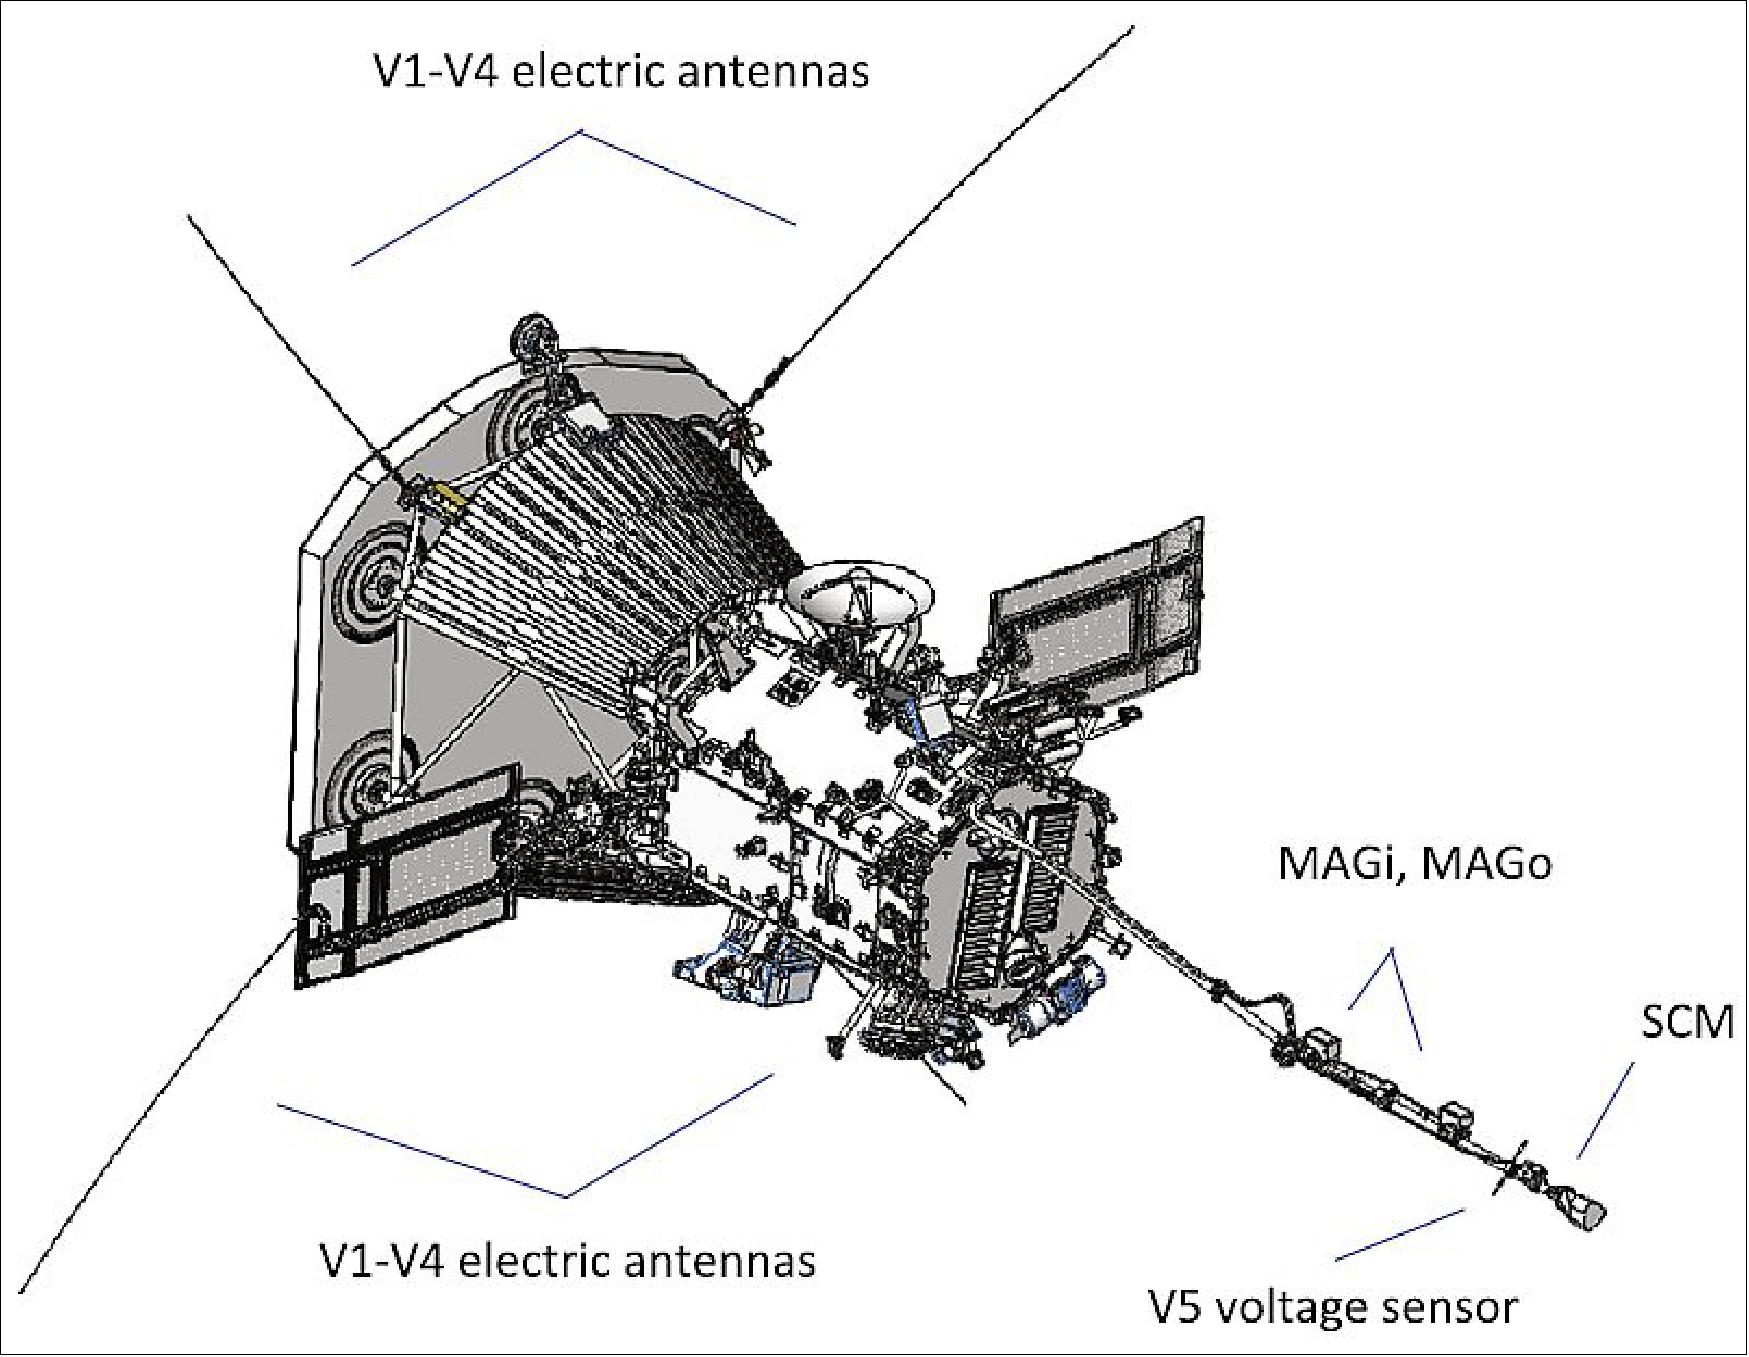 Figure 113: FIELDS uses 5 voltage and 3 magnetic sensors to measure electric and magnetic fields. The four V1–V4 sensors are deployed into full sunlight near the base of the SPP heat shield (TPS). The SCM (Search Coil Magnetometer) is mounted at the end of the instrument boom. Two fluxgate magnetometers (MAGi and MAGo) and a simple voltage sensor V5 are also mounted on the boom (image credit: FIELDS collaboration)